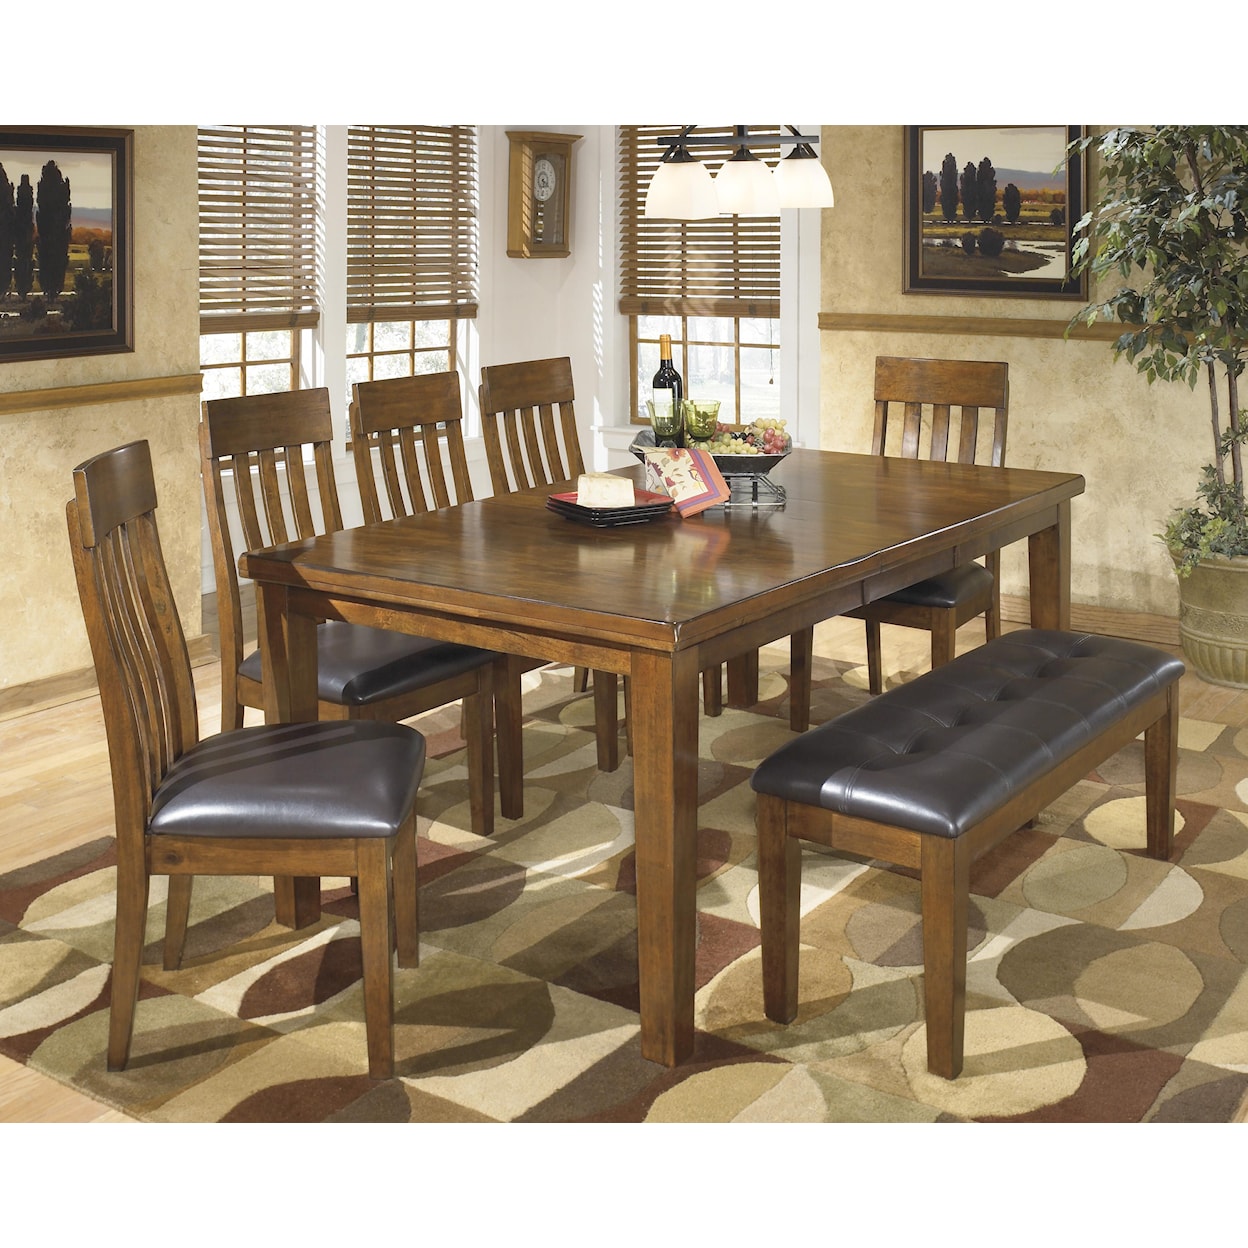 Benchcraft Ralene 7-Pc Dining Set with Bench